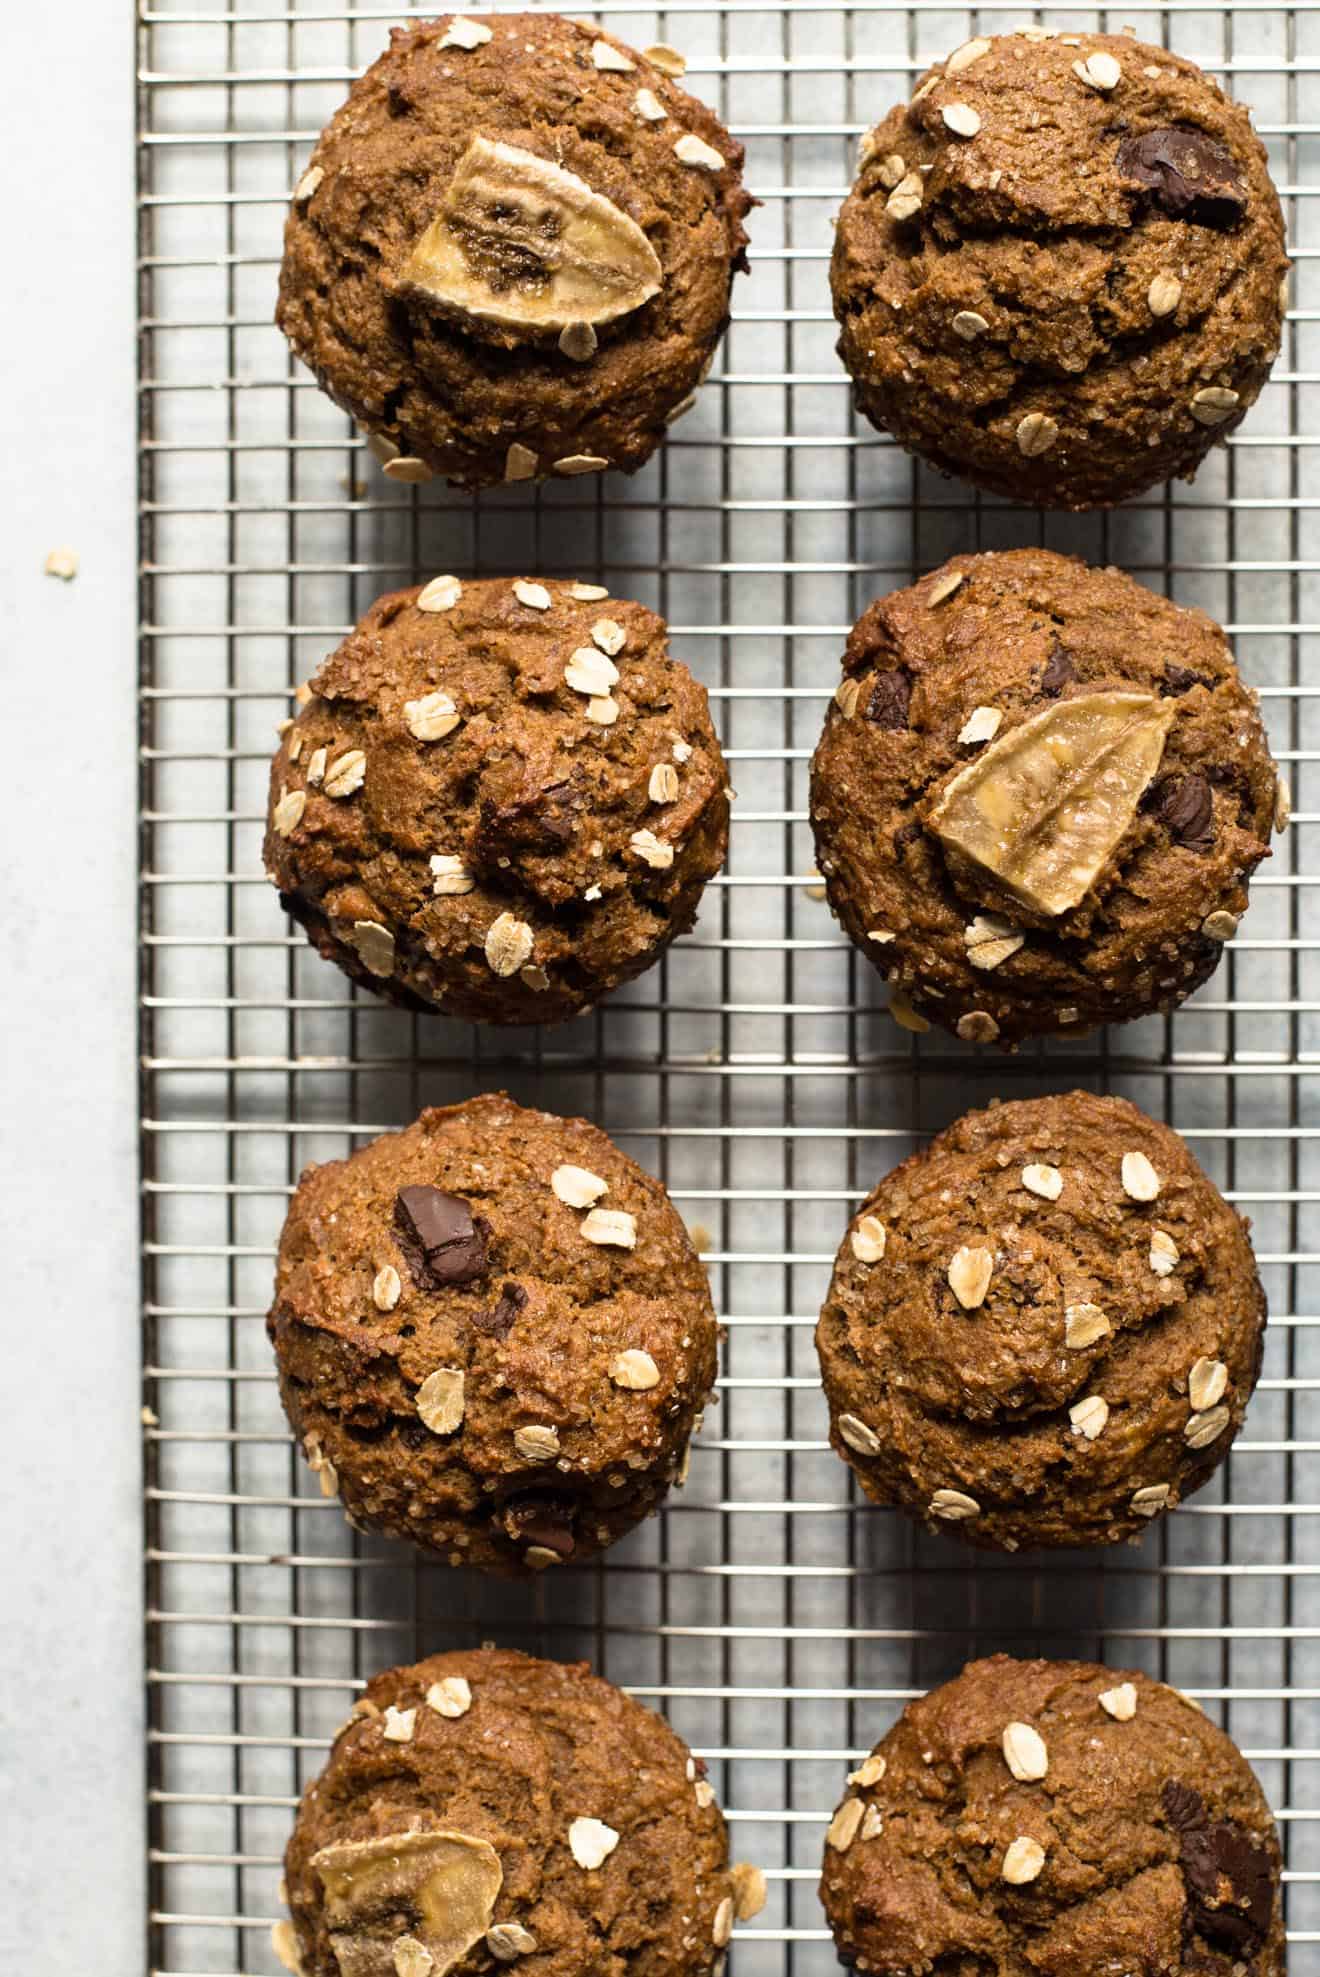 GLUTEN-FREE Oat Flour Banana Chocolate Muffins - Moist and healthy muffins that are great for breakfast!